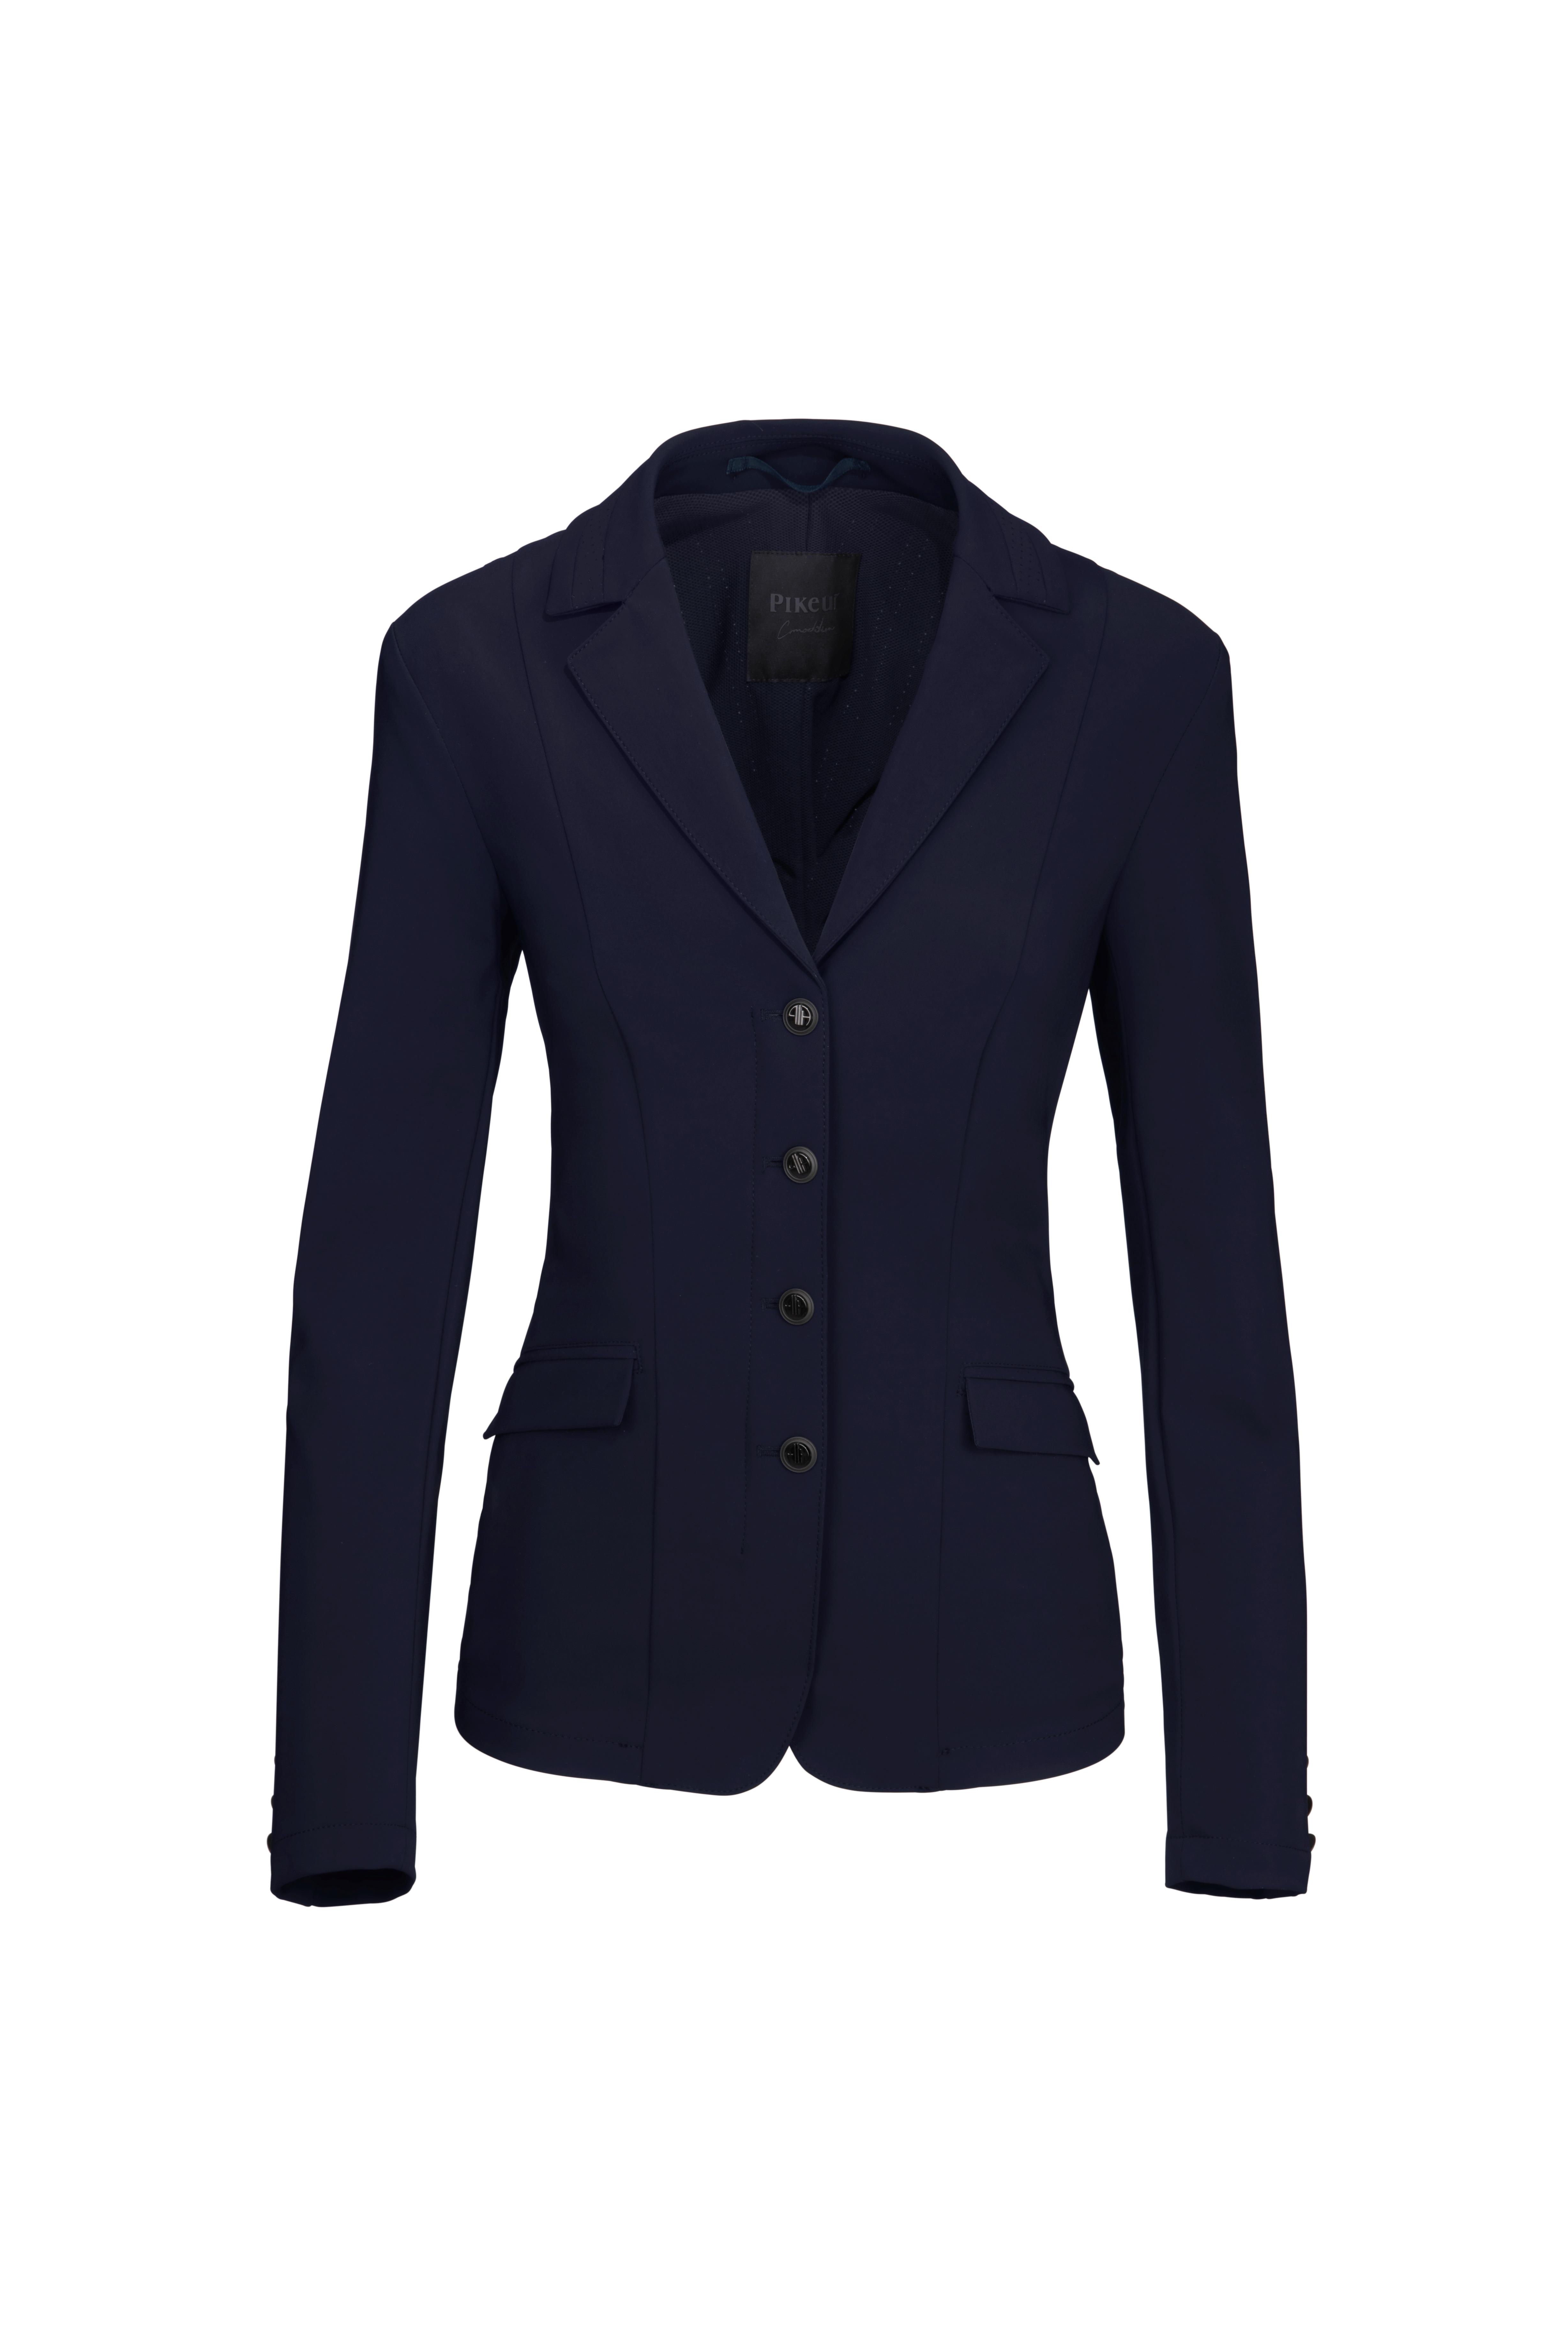 PIKEUR COMPETITION JACKET